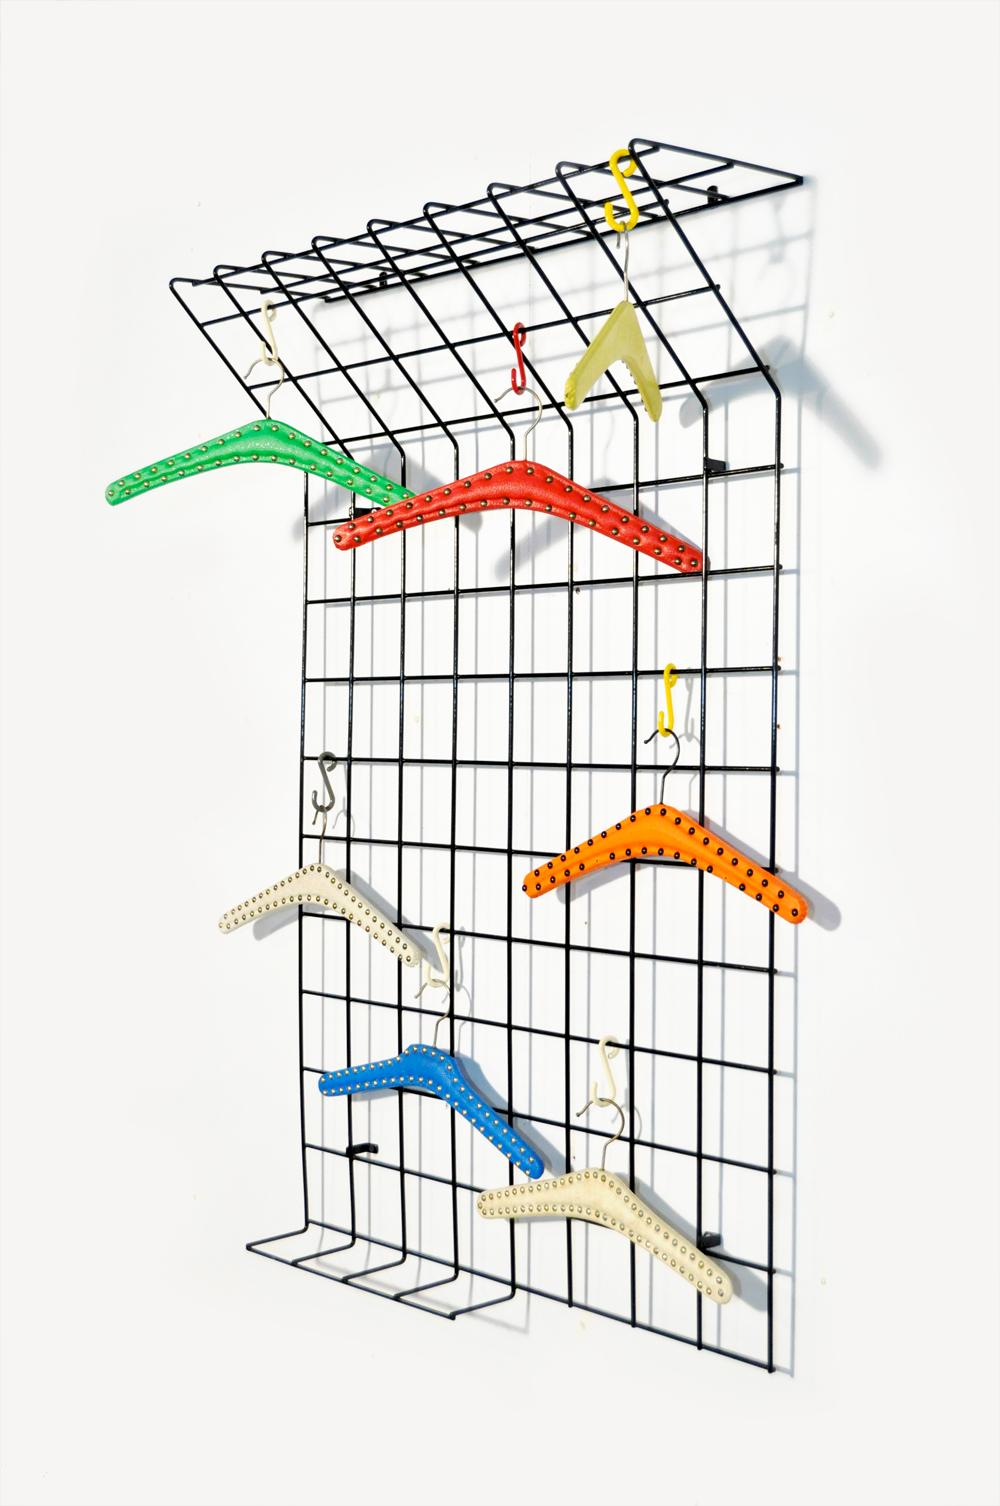 Metal wire wall coat rack designed by Karl Fichtel and produced by Drahtwerke Erlau AG Aalen, Germany 1950. Wall coat rack of black metal wire work with “hat shelf”, umbrella stand and colored plastic hooks/hangers (can be moved as desired). The